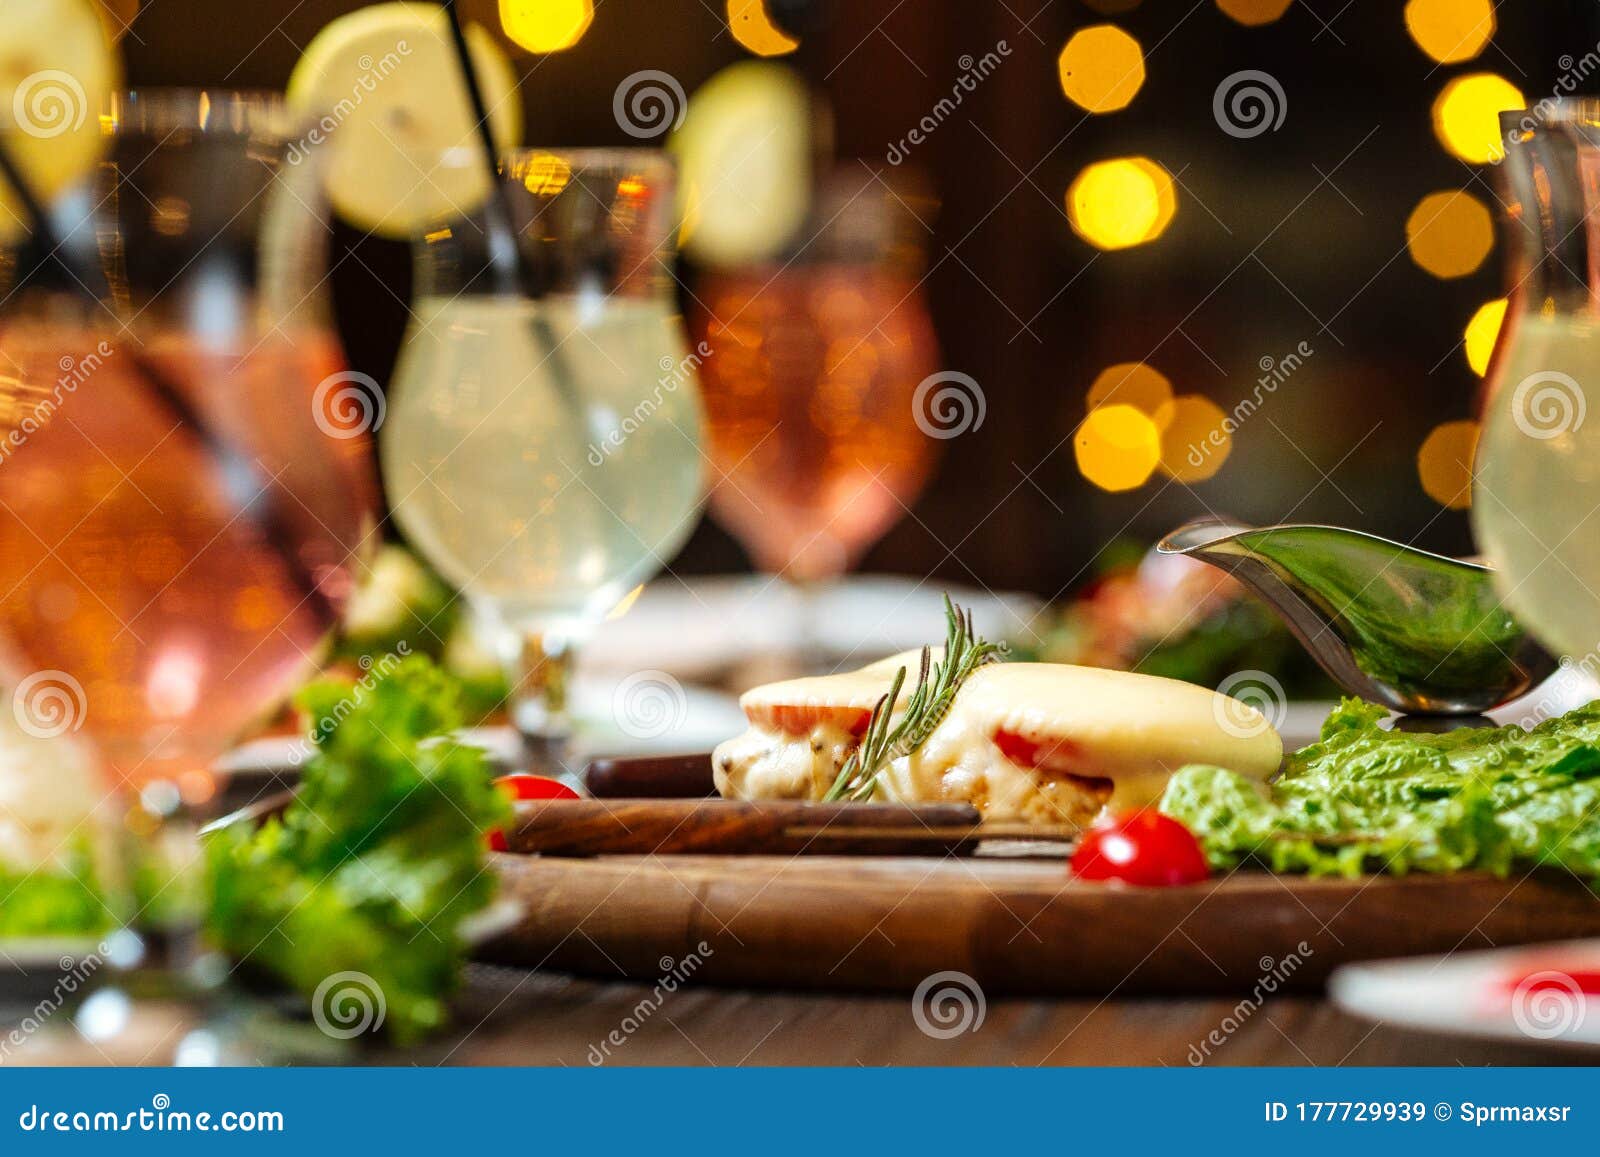 Evening Gala Dinner With Cocktails Stock Image Image Of Food Glass 177729939